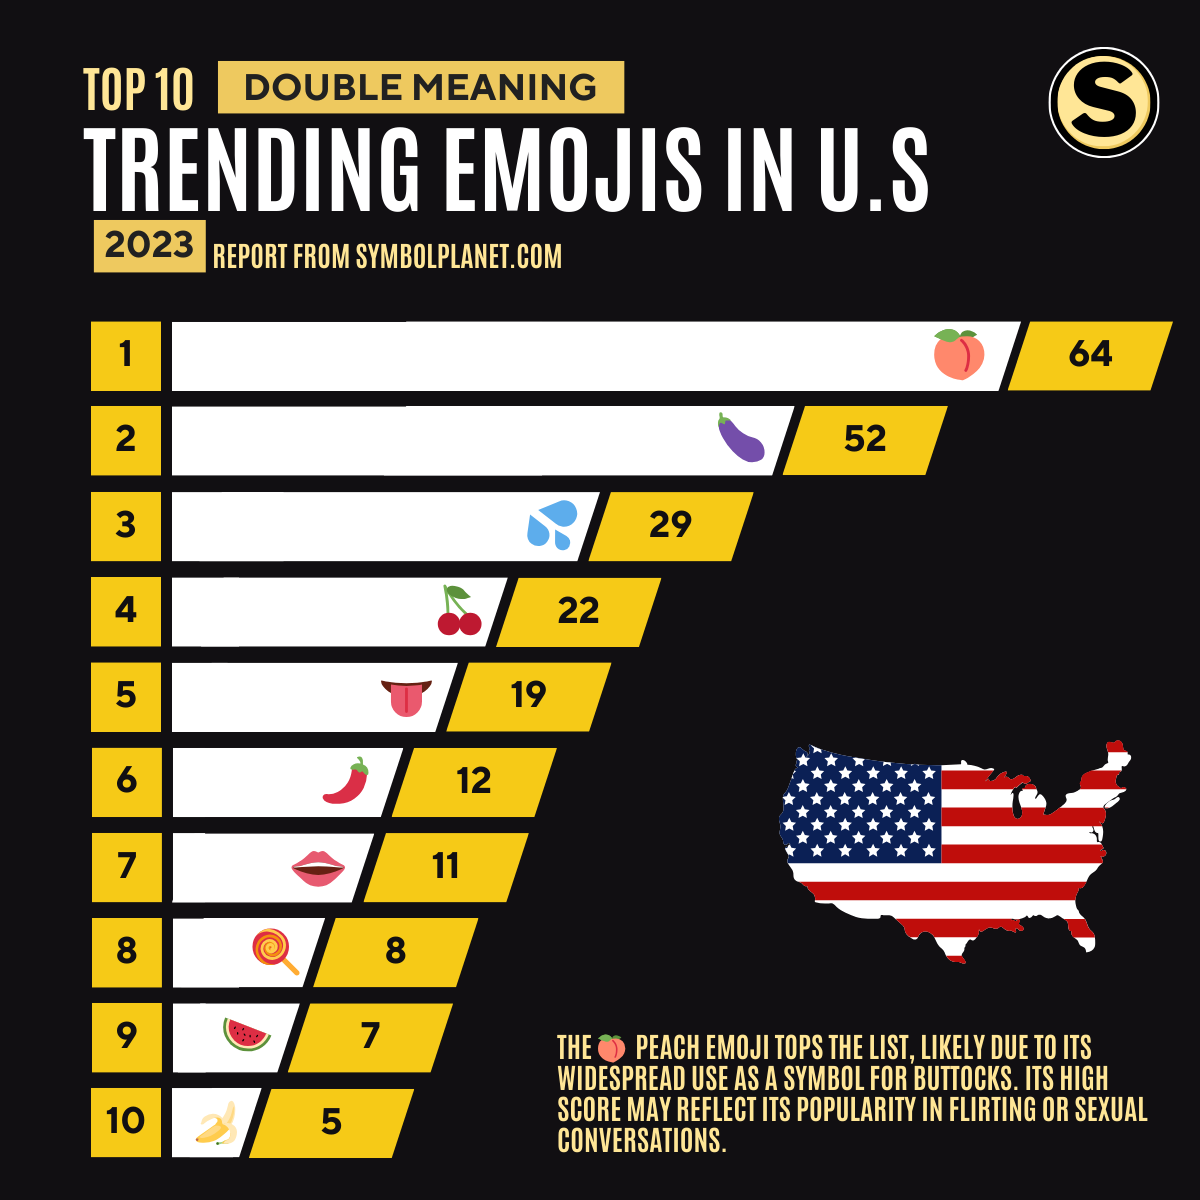 Top 10 Trending Double Meaning (Sex) Emojis of 2023 in the United States